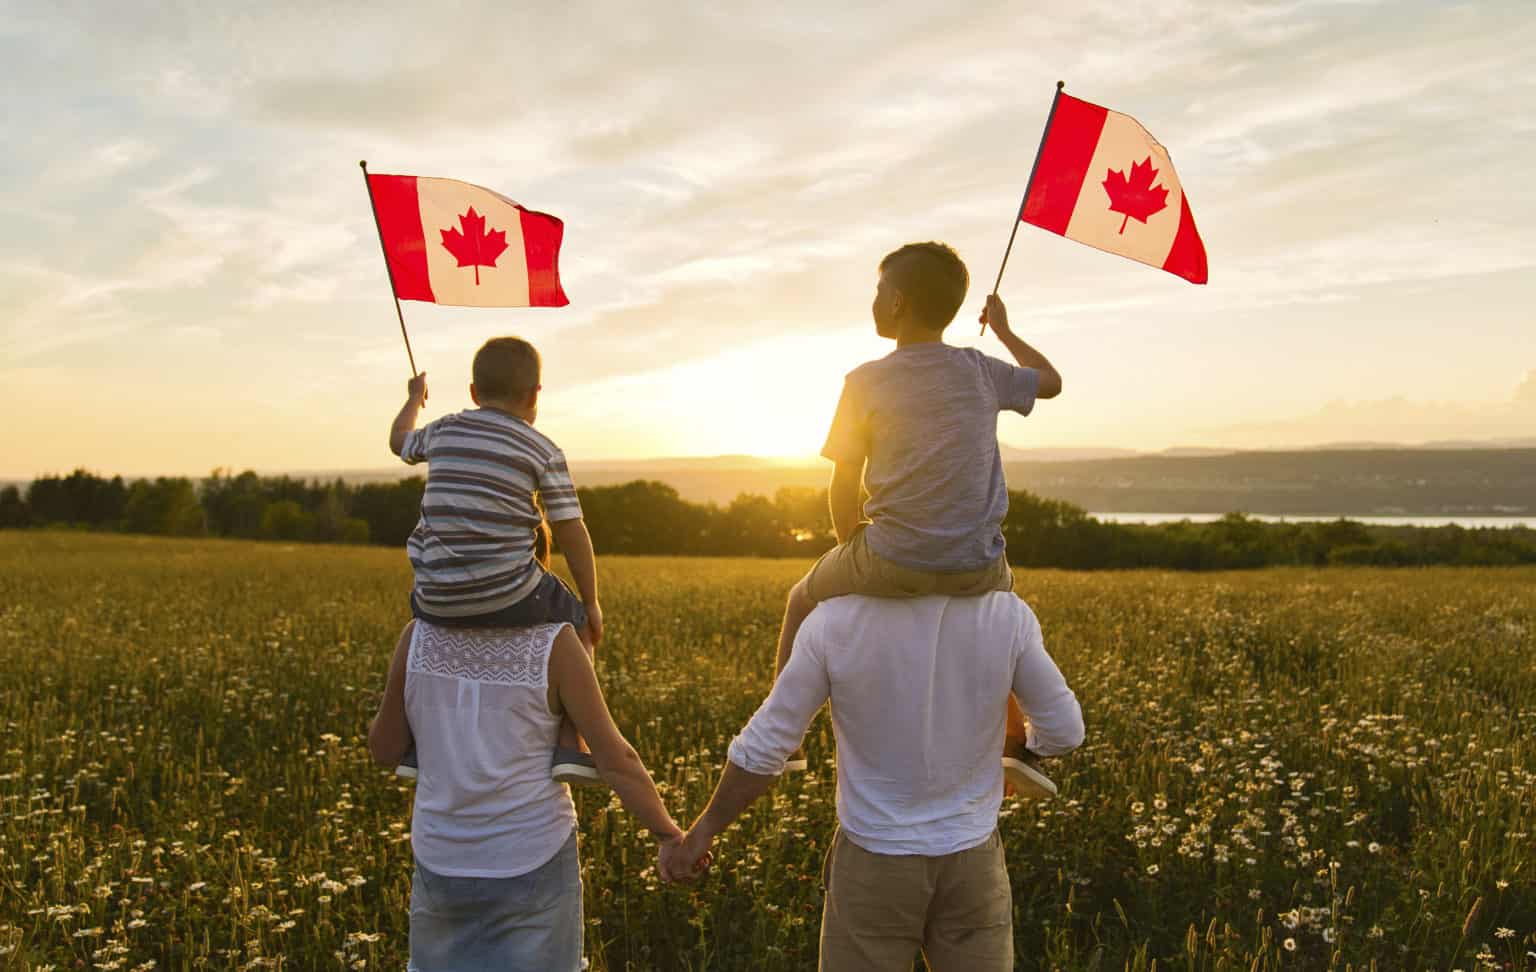 New Data Shows Immigrant Children Grow Up To Out-Earn Canadian-Born Peers